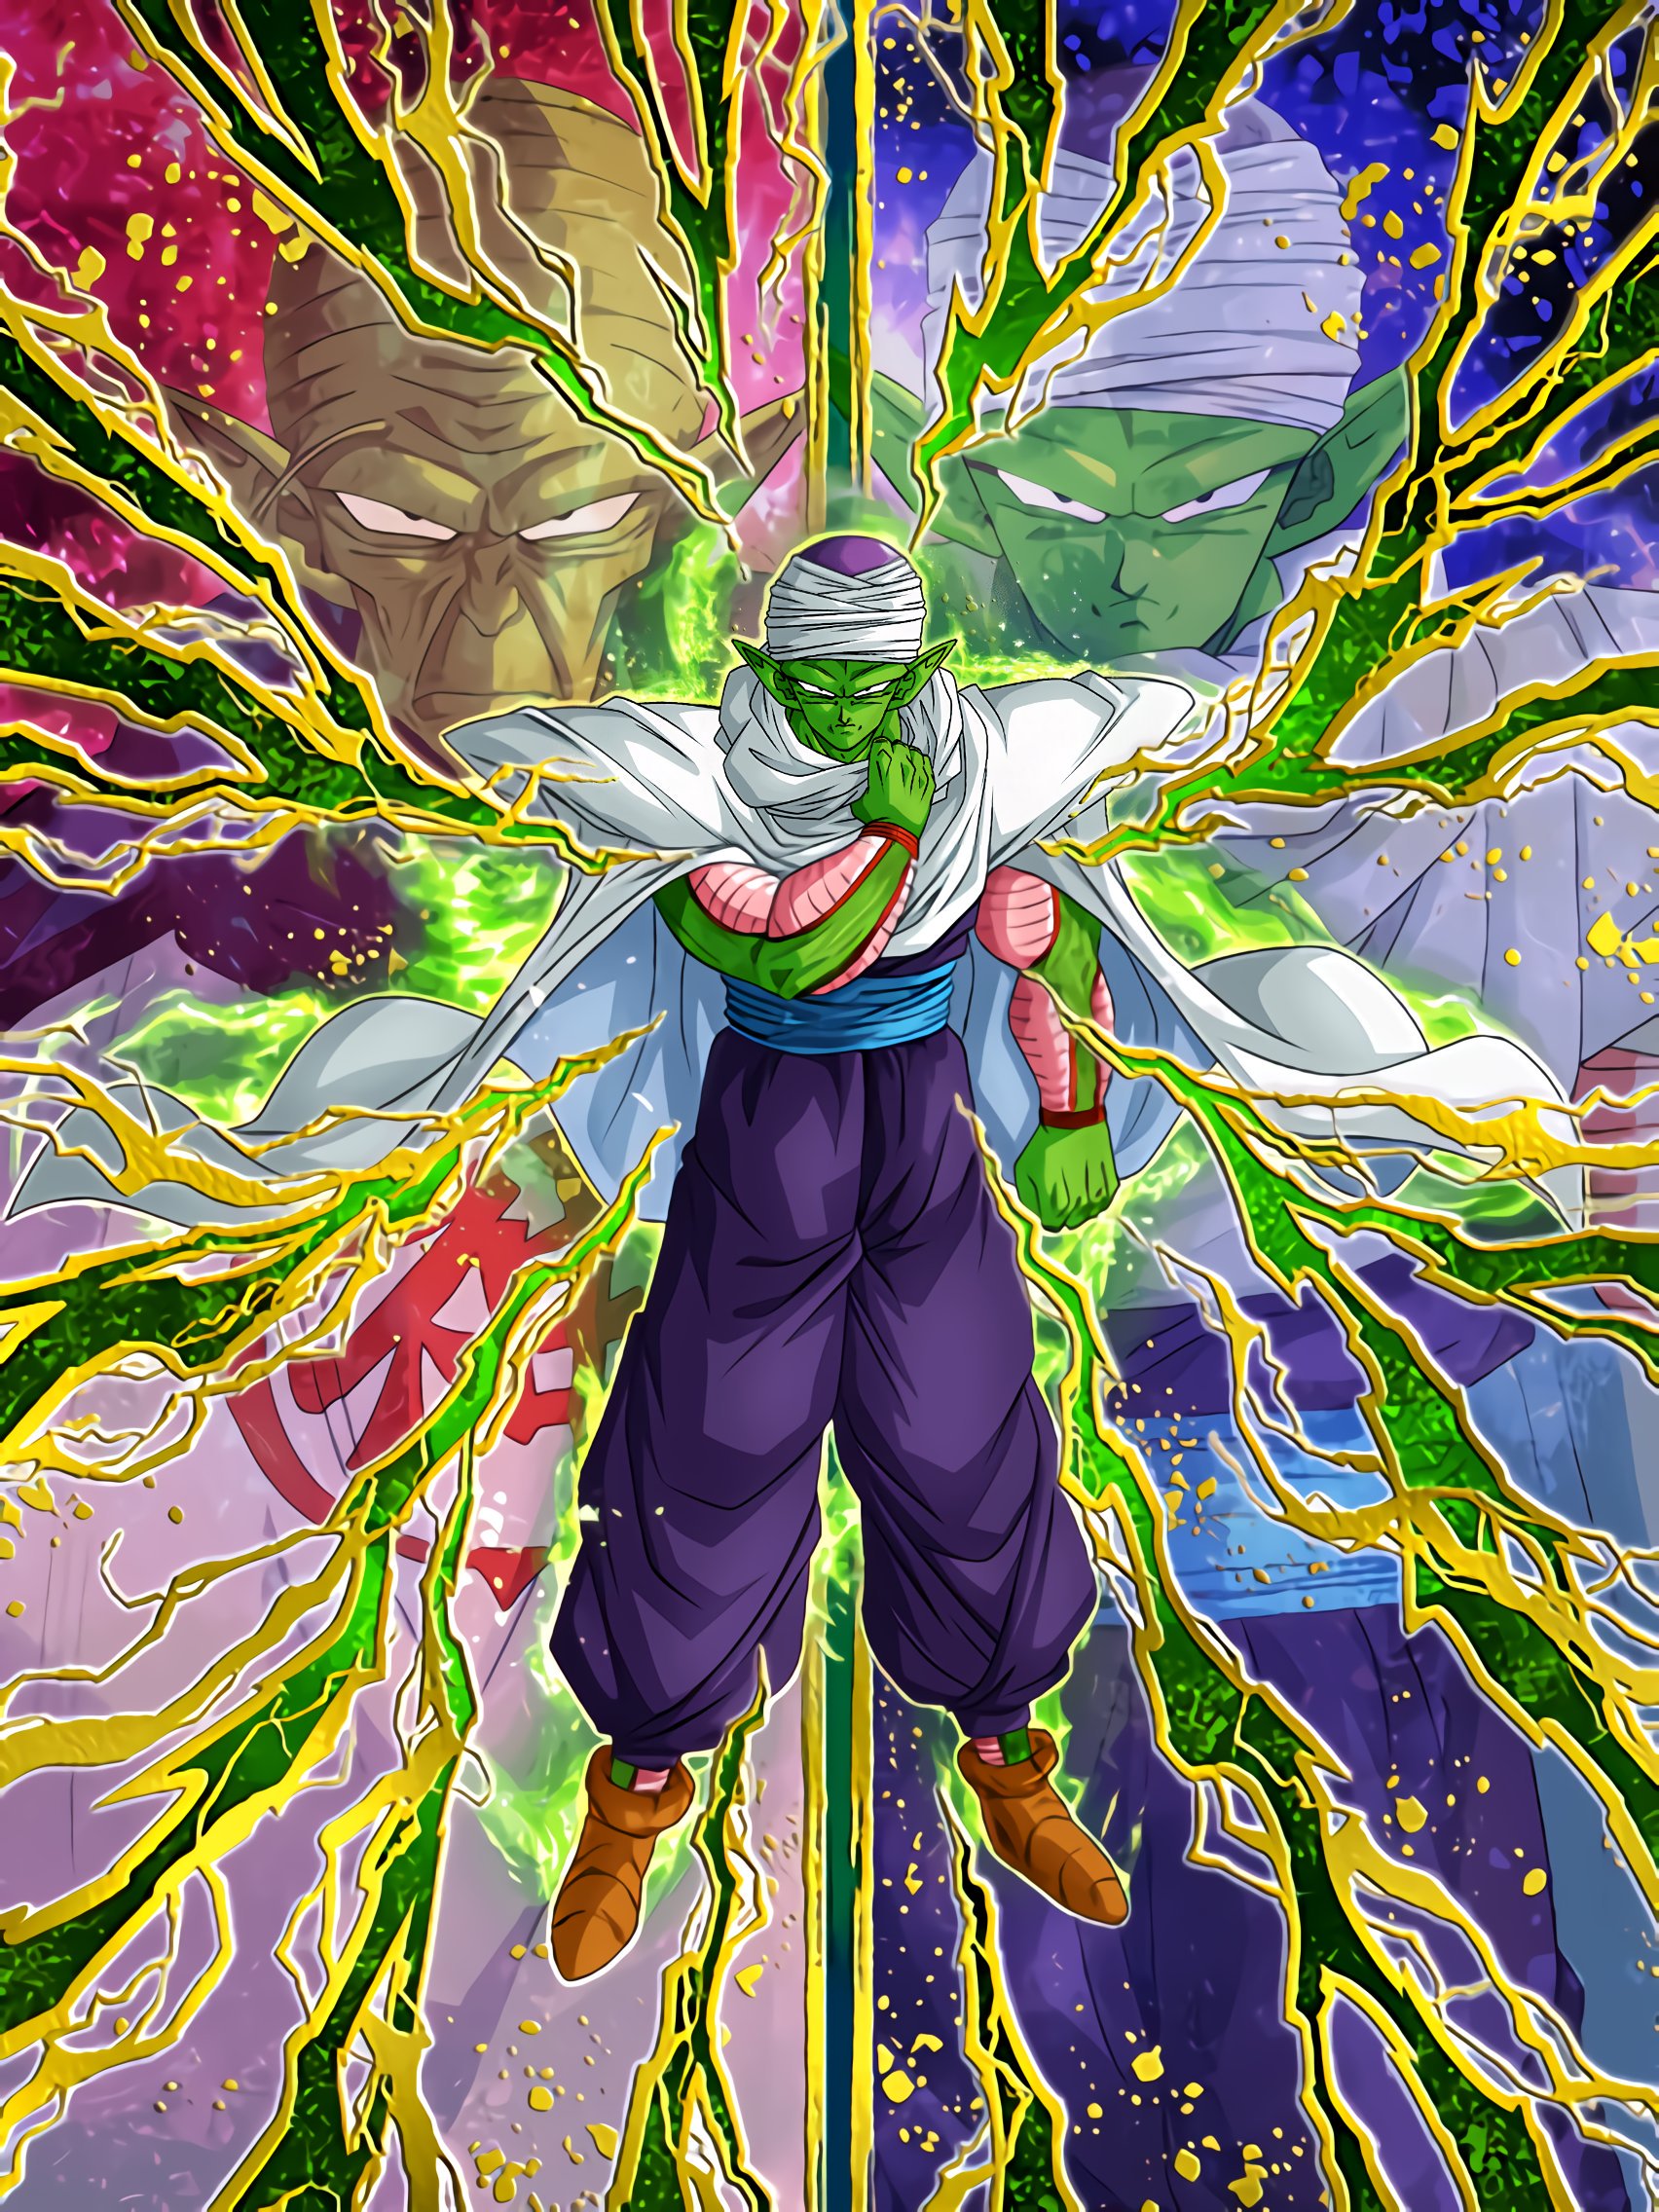 Piccolo merged with Kami